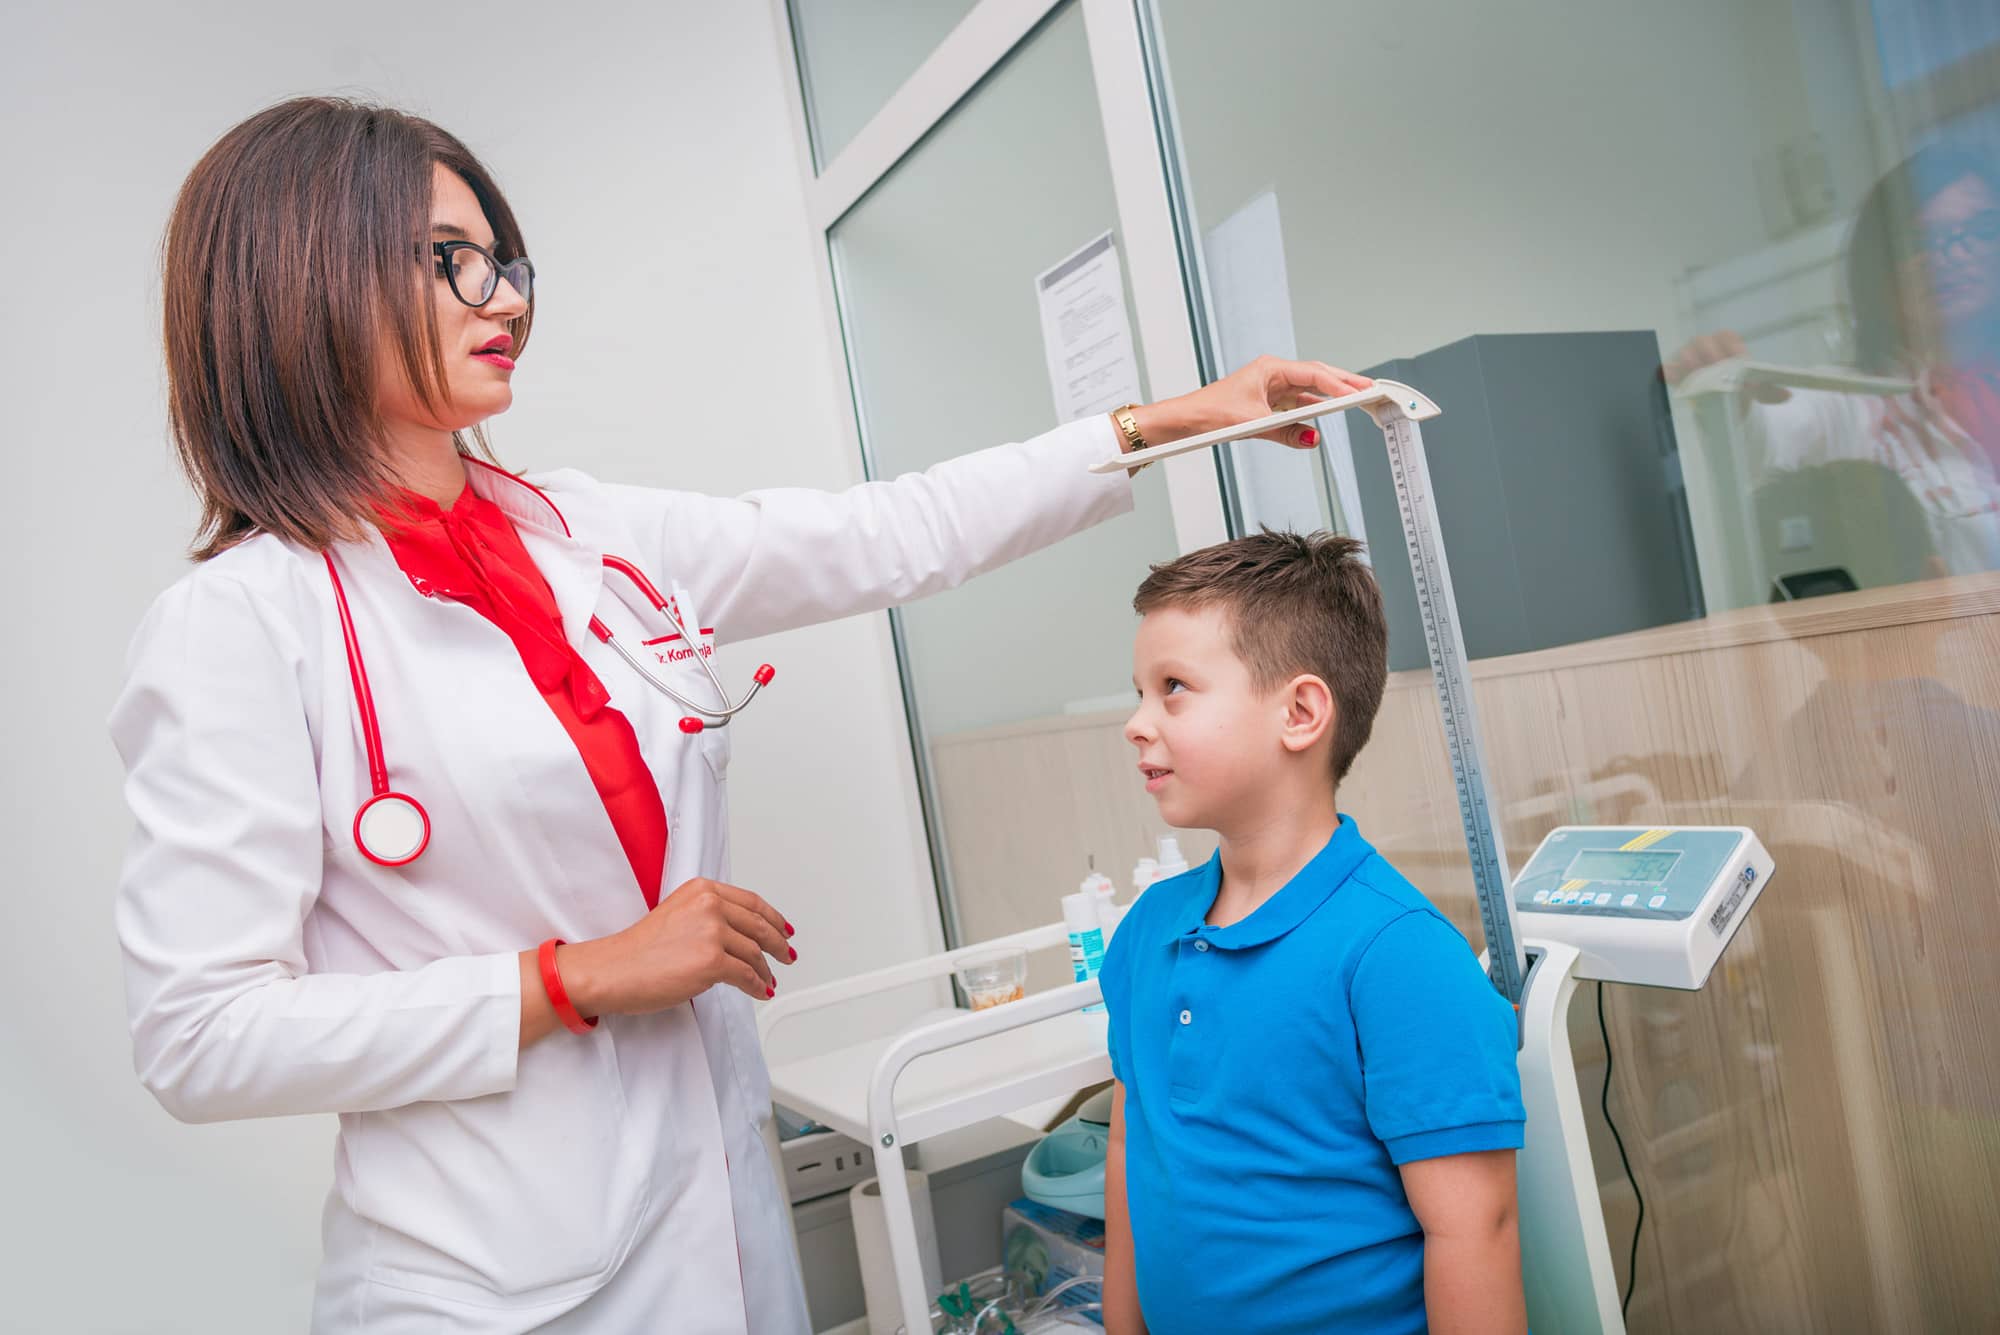 Female doctor measuring the height of little boy in a clinic ( hospital ) while smiling and being gentle.